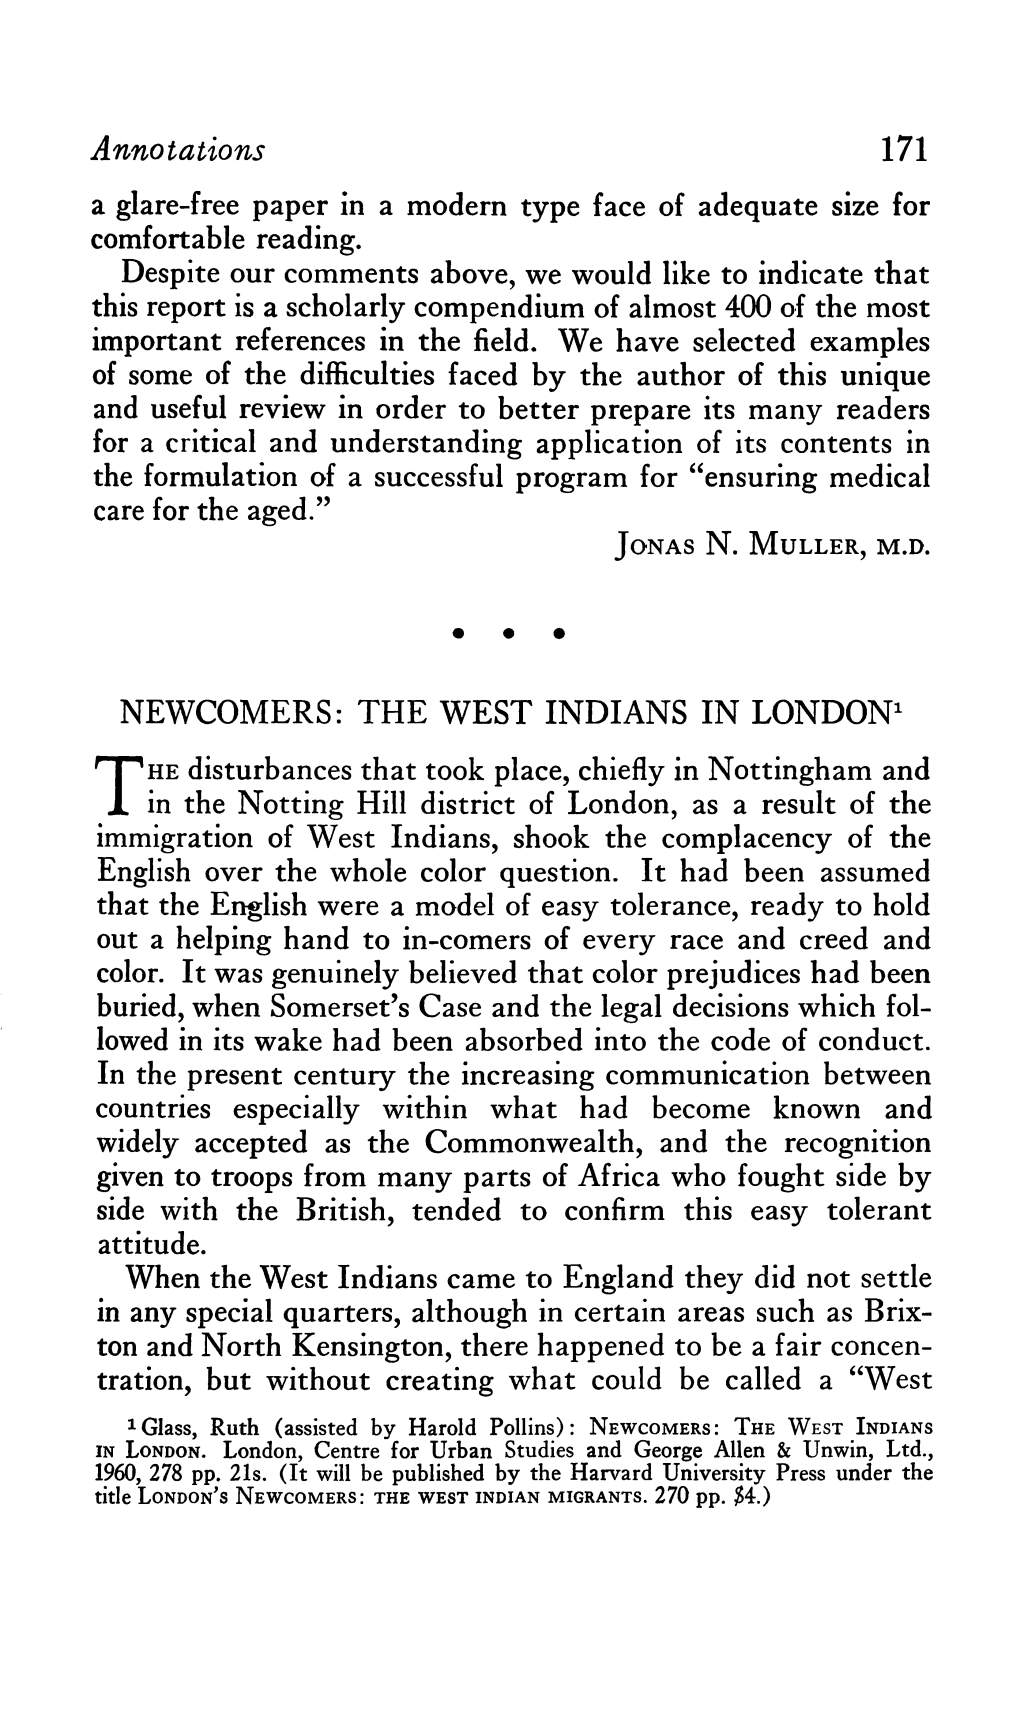 Newcomers the West Indians in London by Ruth Glass and Harold